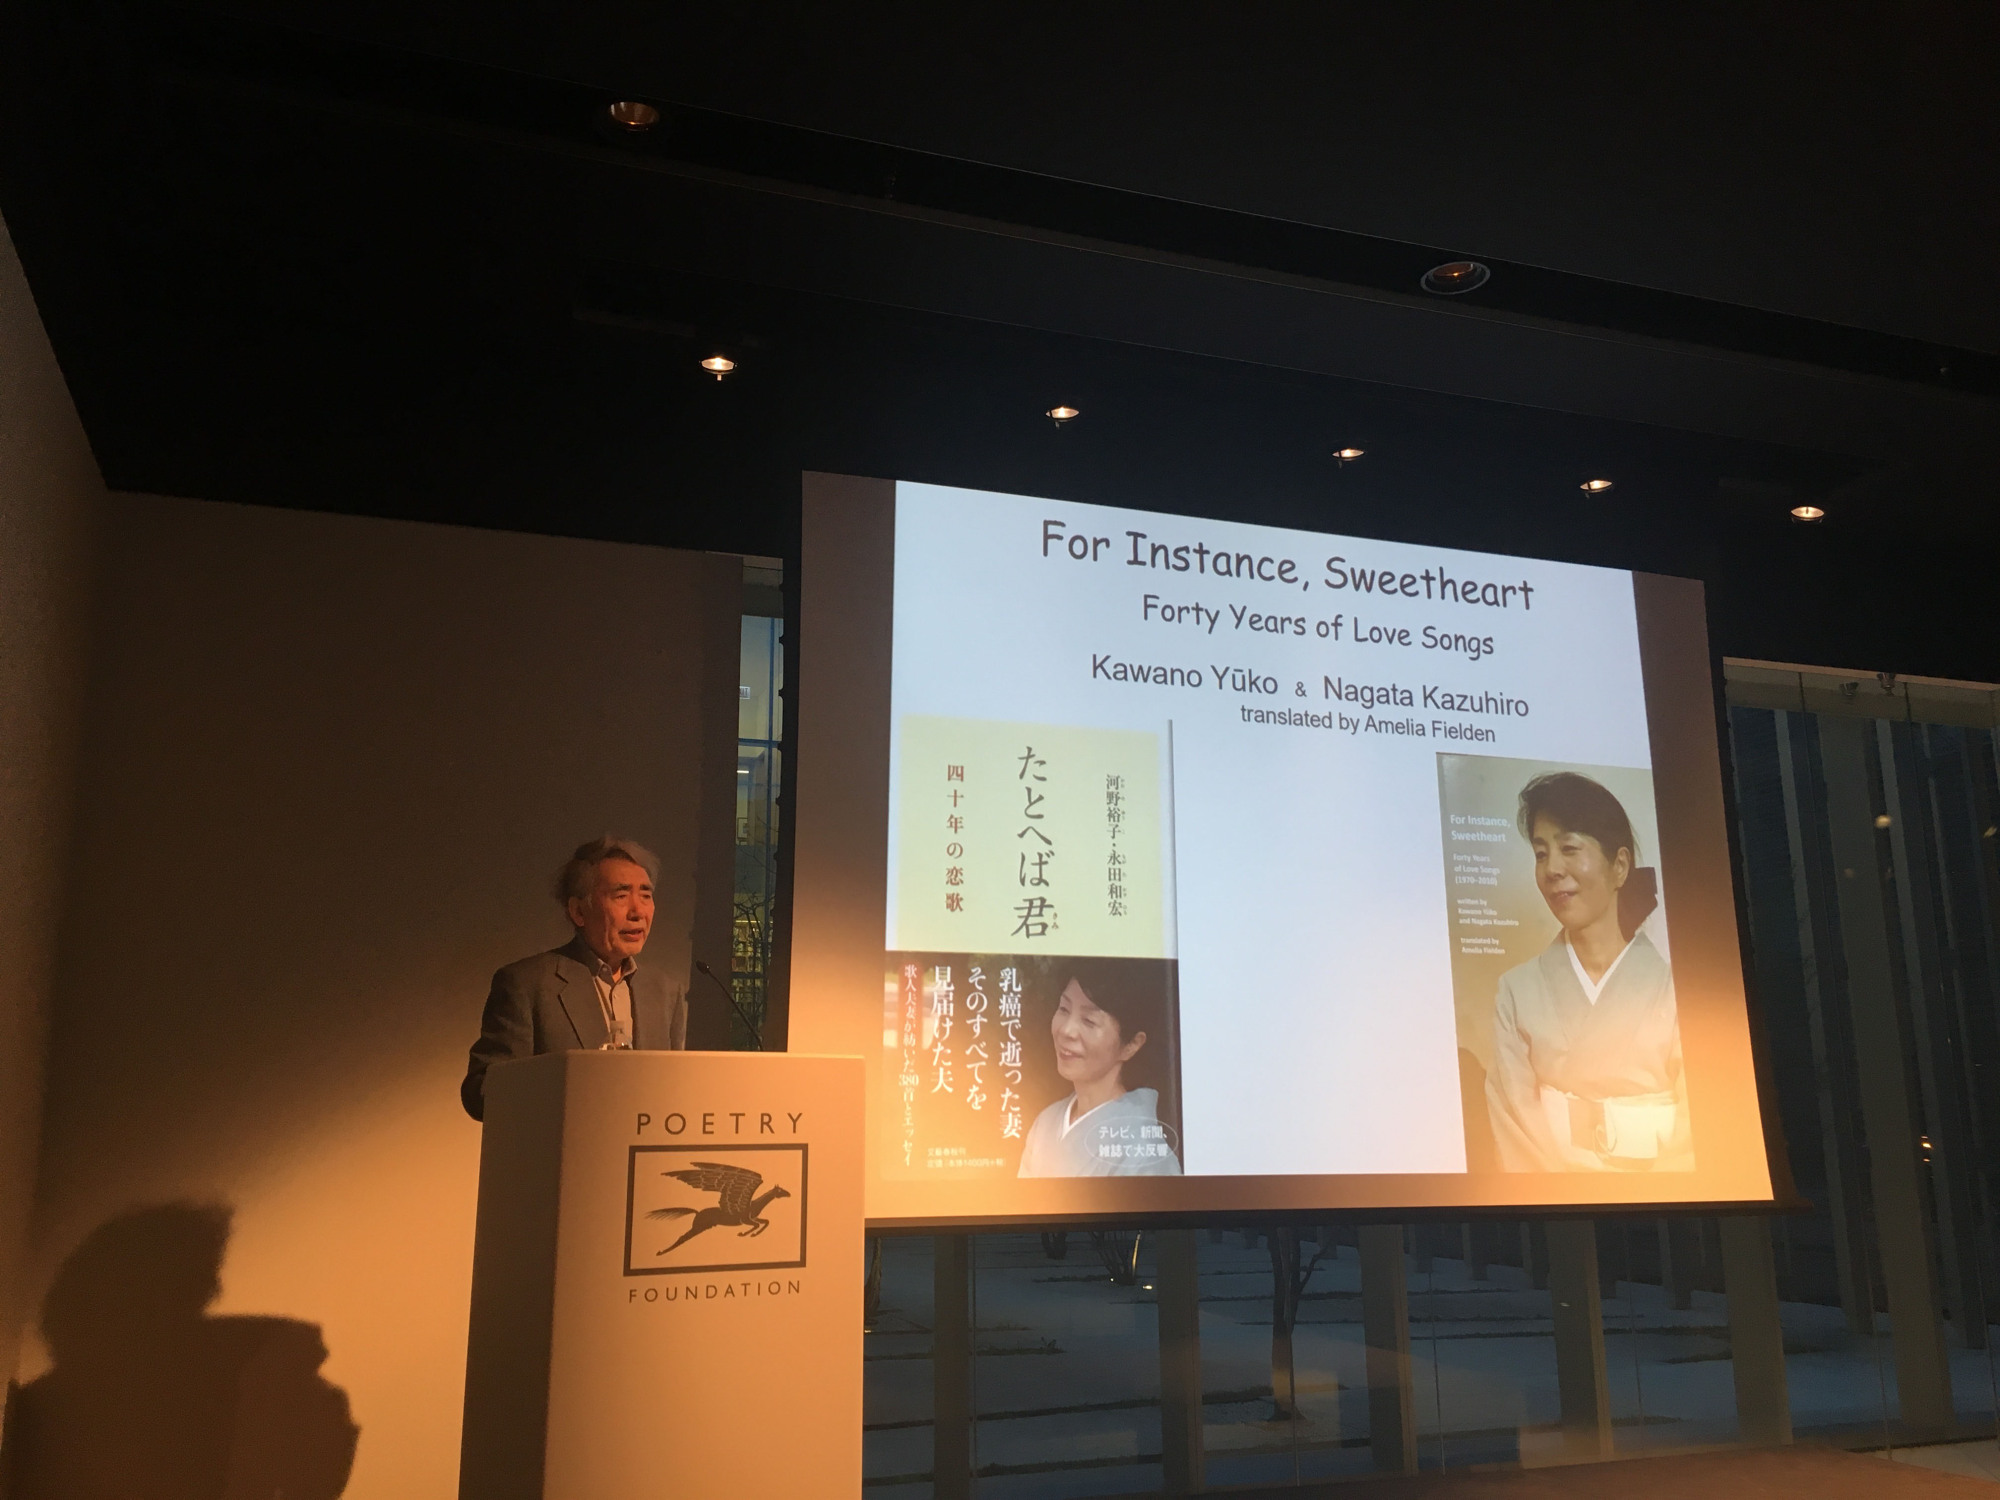 Express yourself: Kazuhiro Nagata gives a presentation on tanka poems in English for the first time at the Poetry Foundation in Chicago on April 21. | DANIEL MORALES